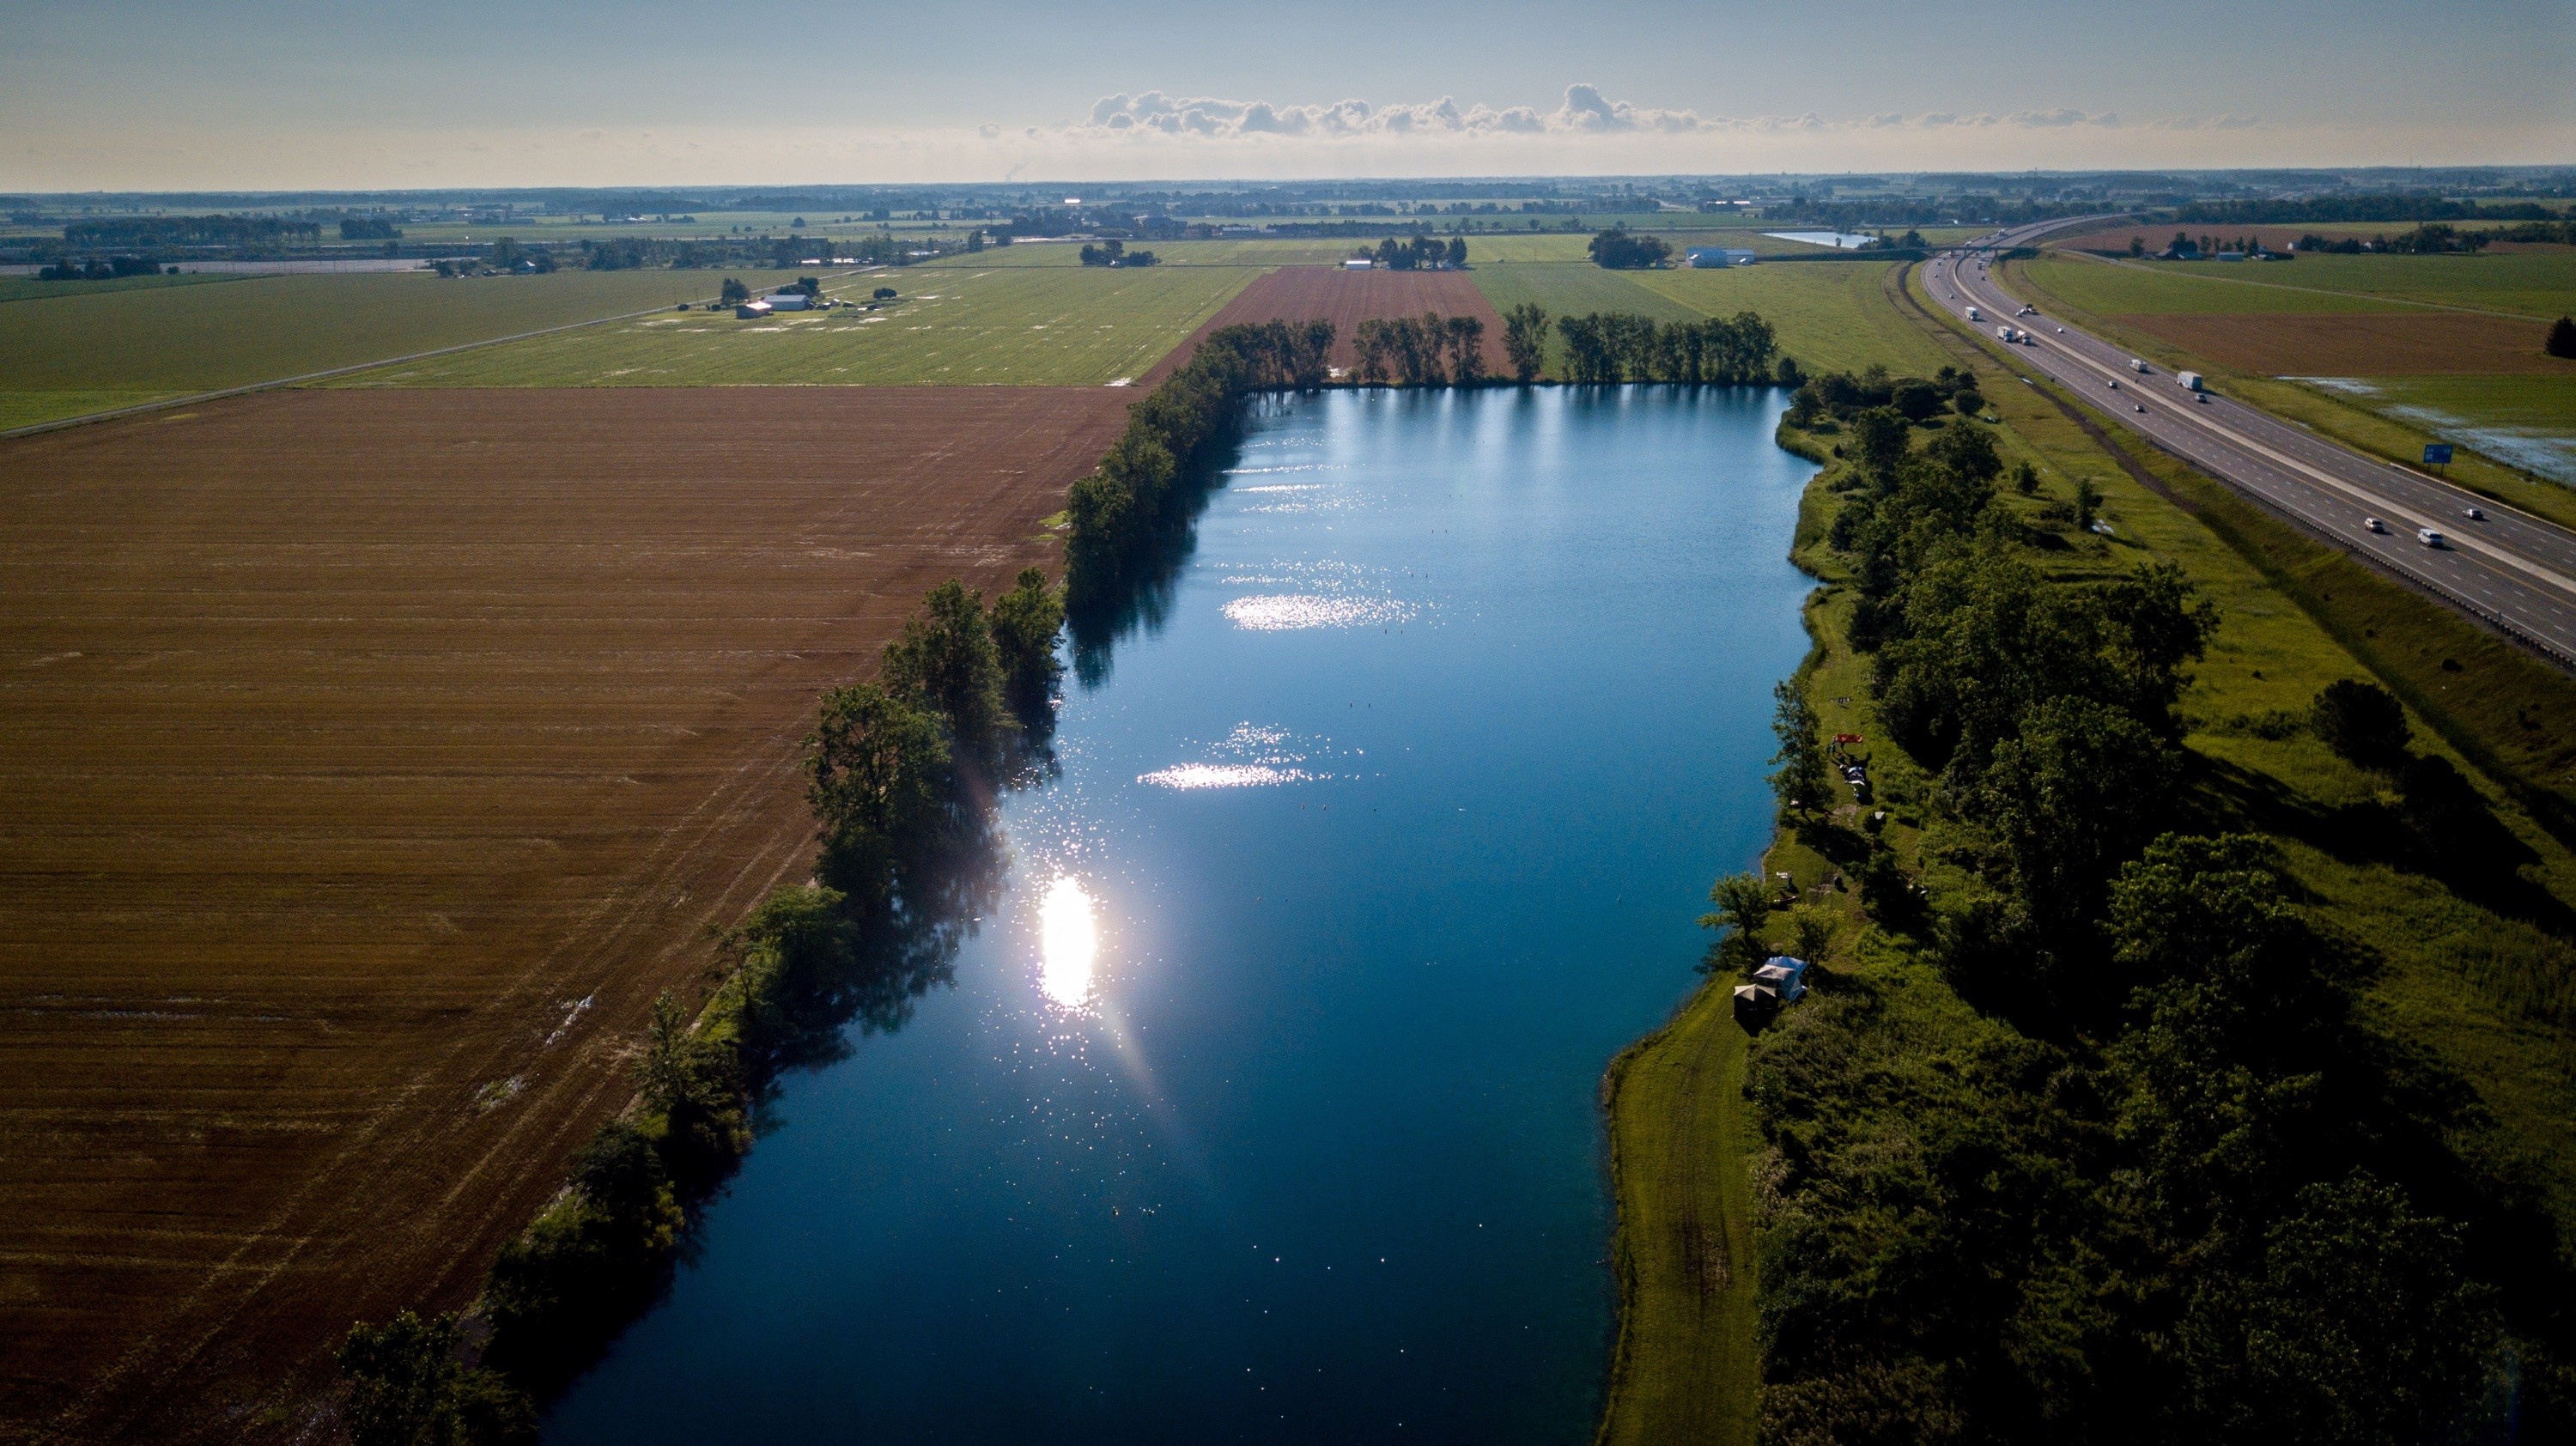 3000x1684 A guy took some pics of my lake from a drone. I think it came out pretty  cool.